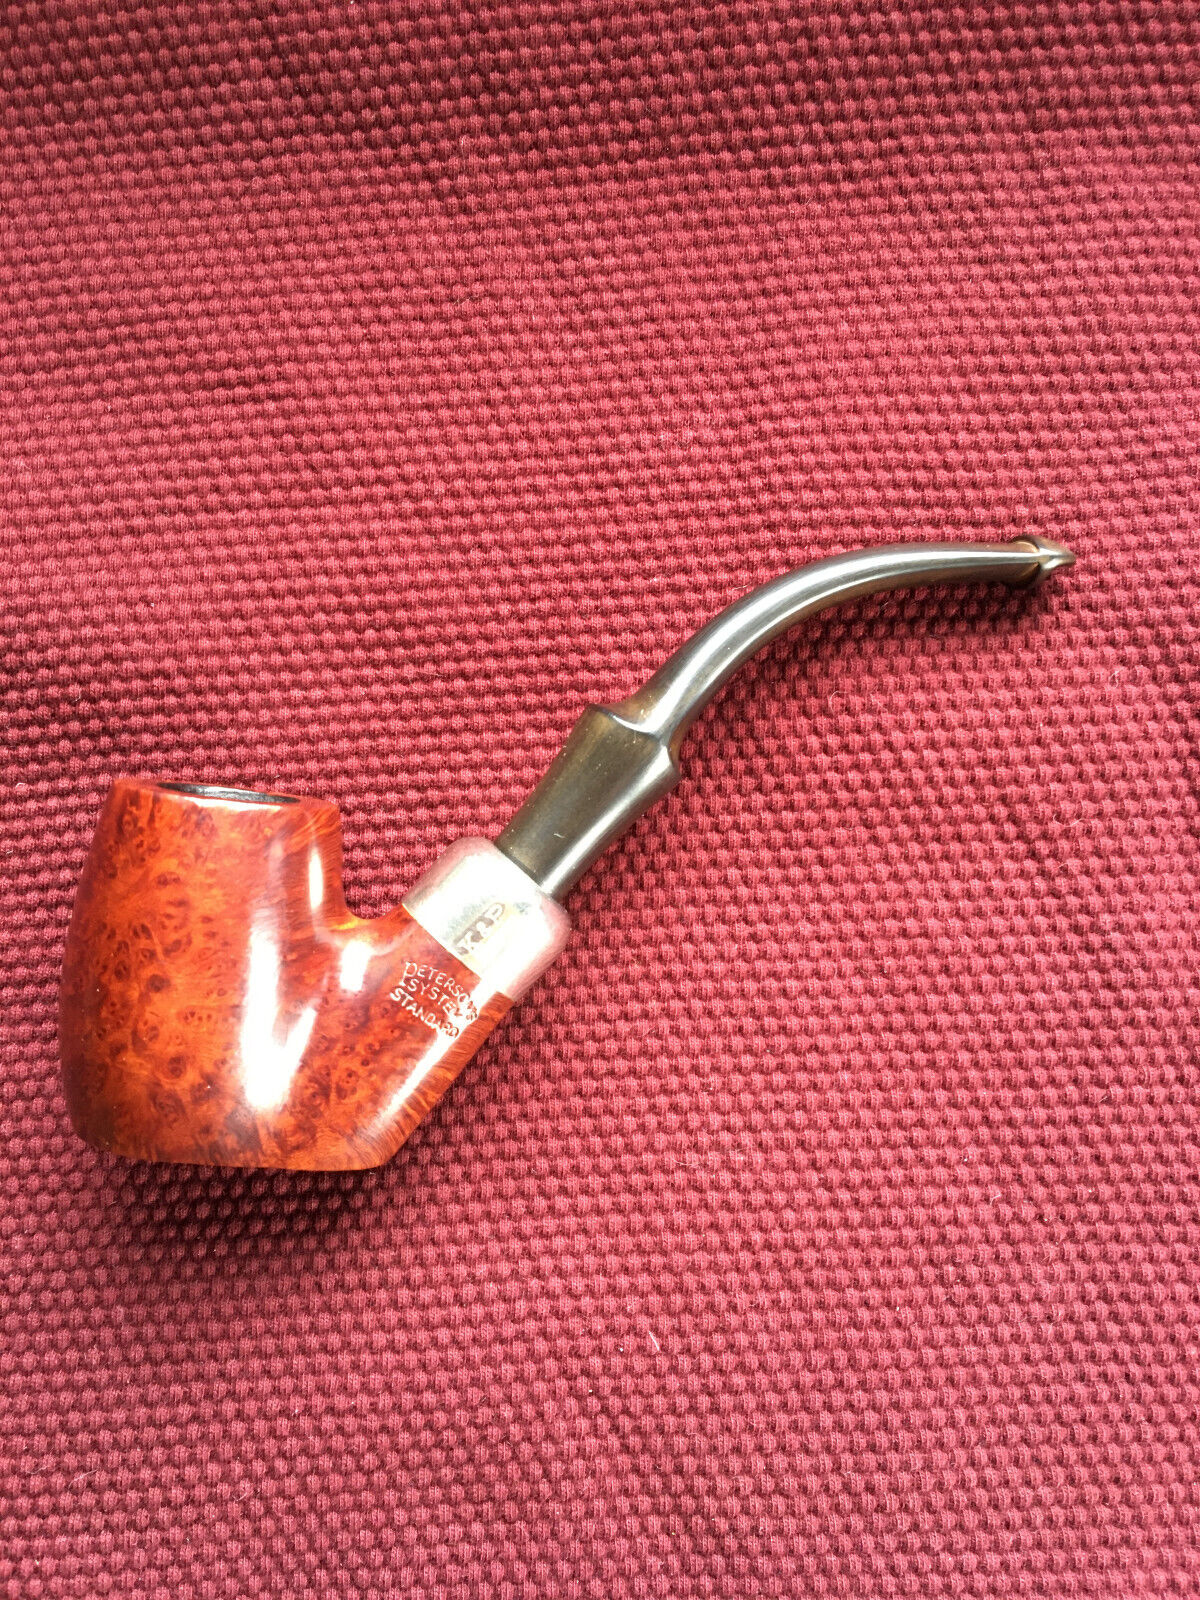 Peterson pipe 7 details coming this week